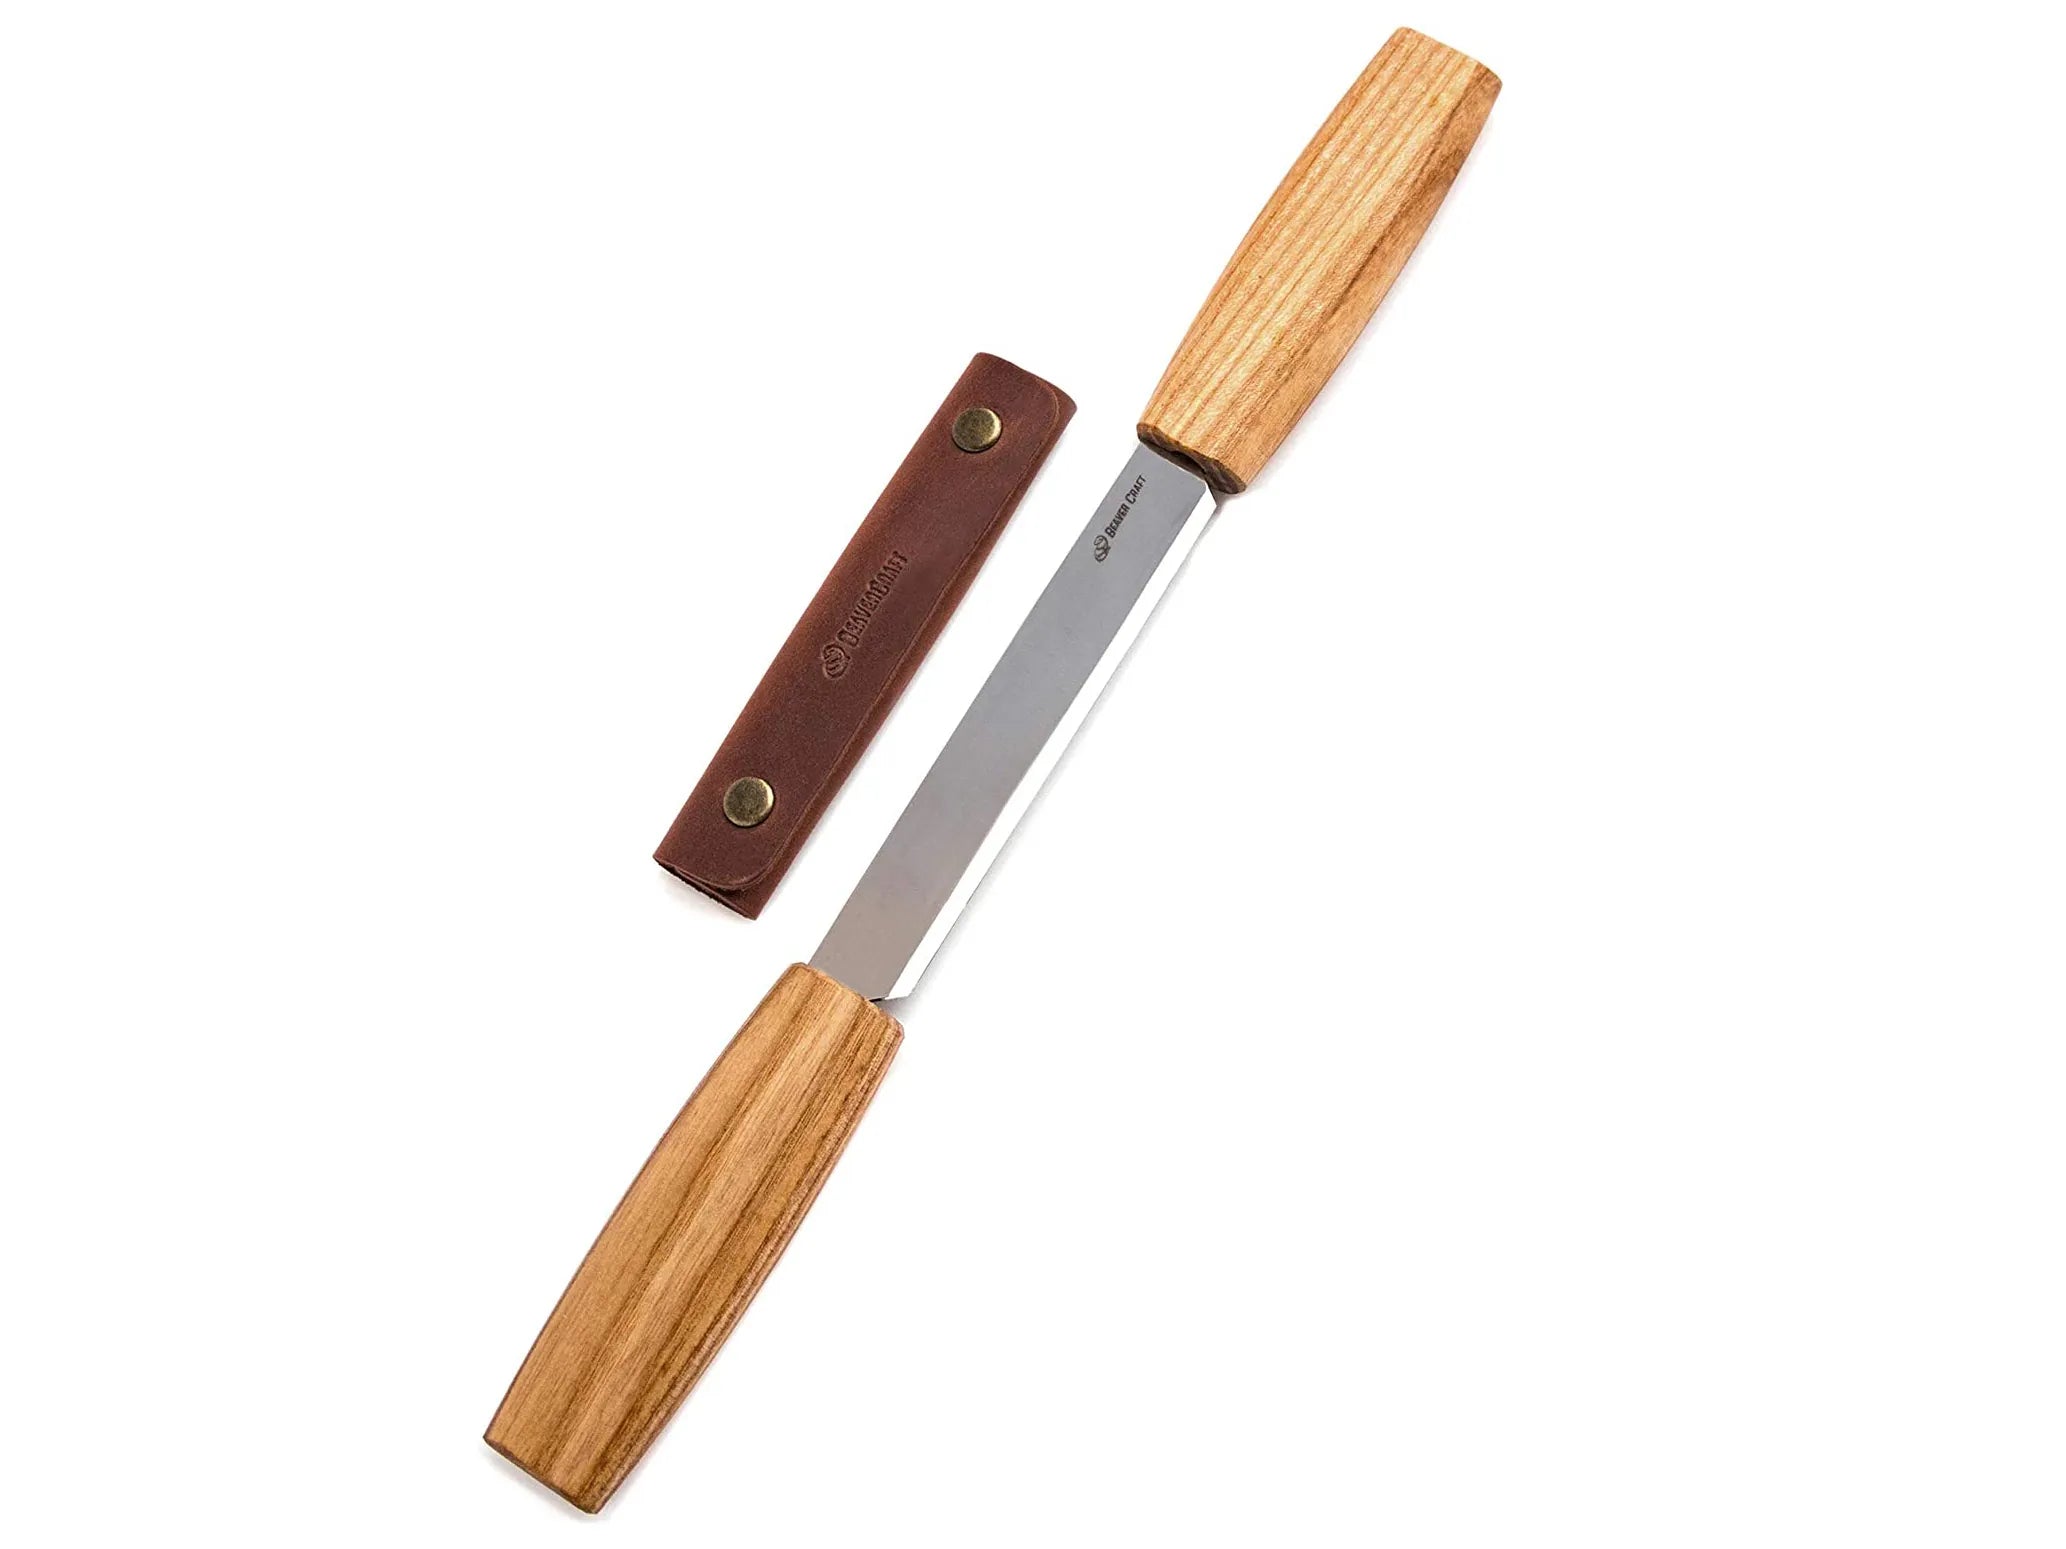 Draw Knife - Buy a Durable, Packable Draw Knife